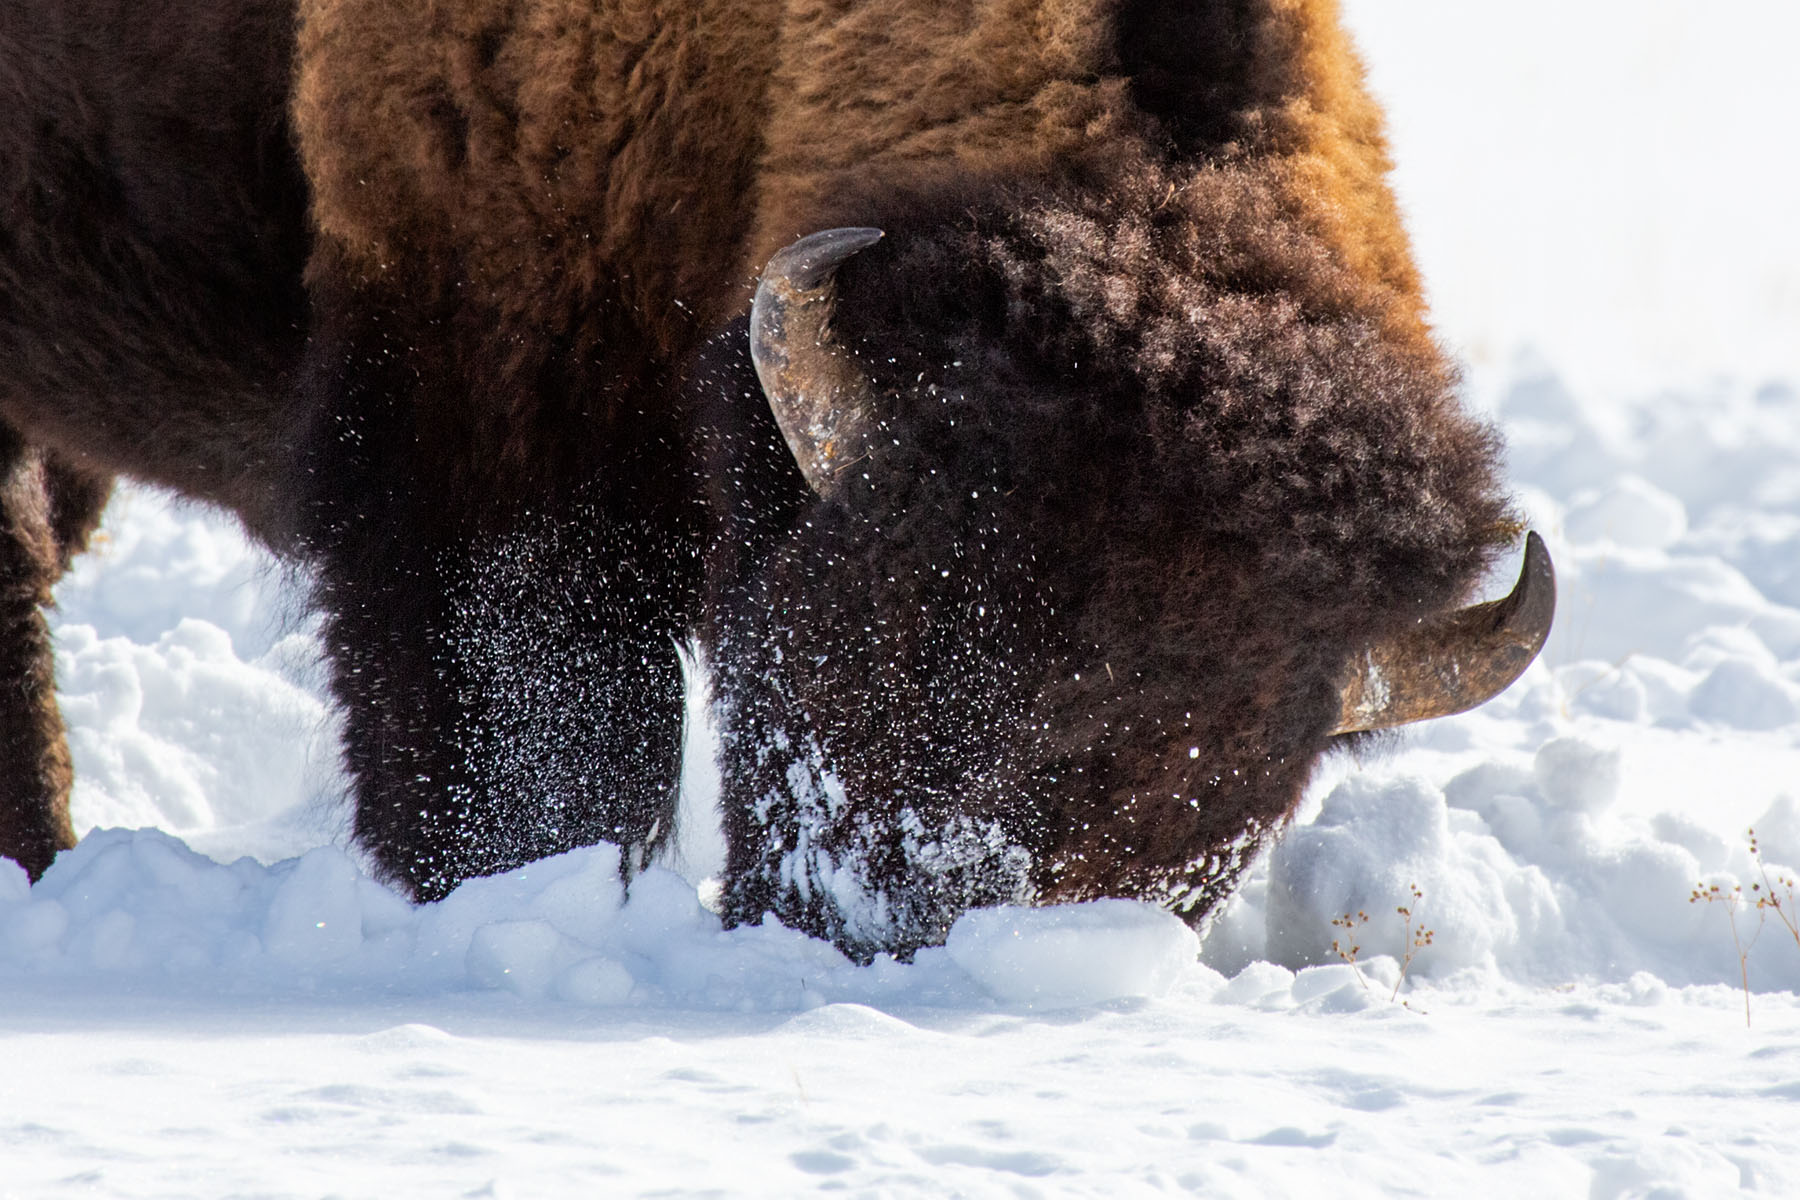 Bison sweeps the snow with its head to get at the grass, Yellowstone, February 2022.  Click for next photo.